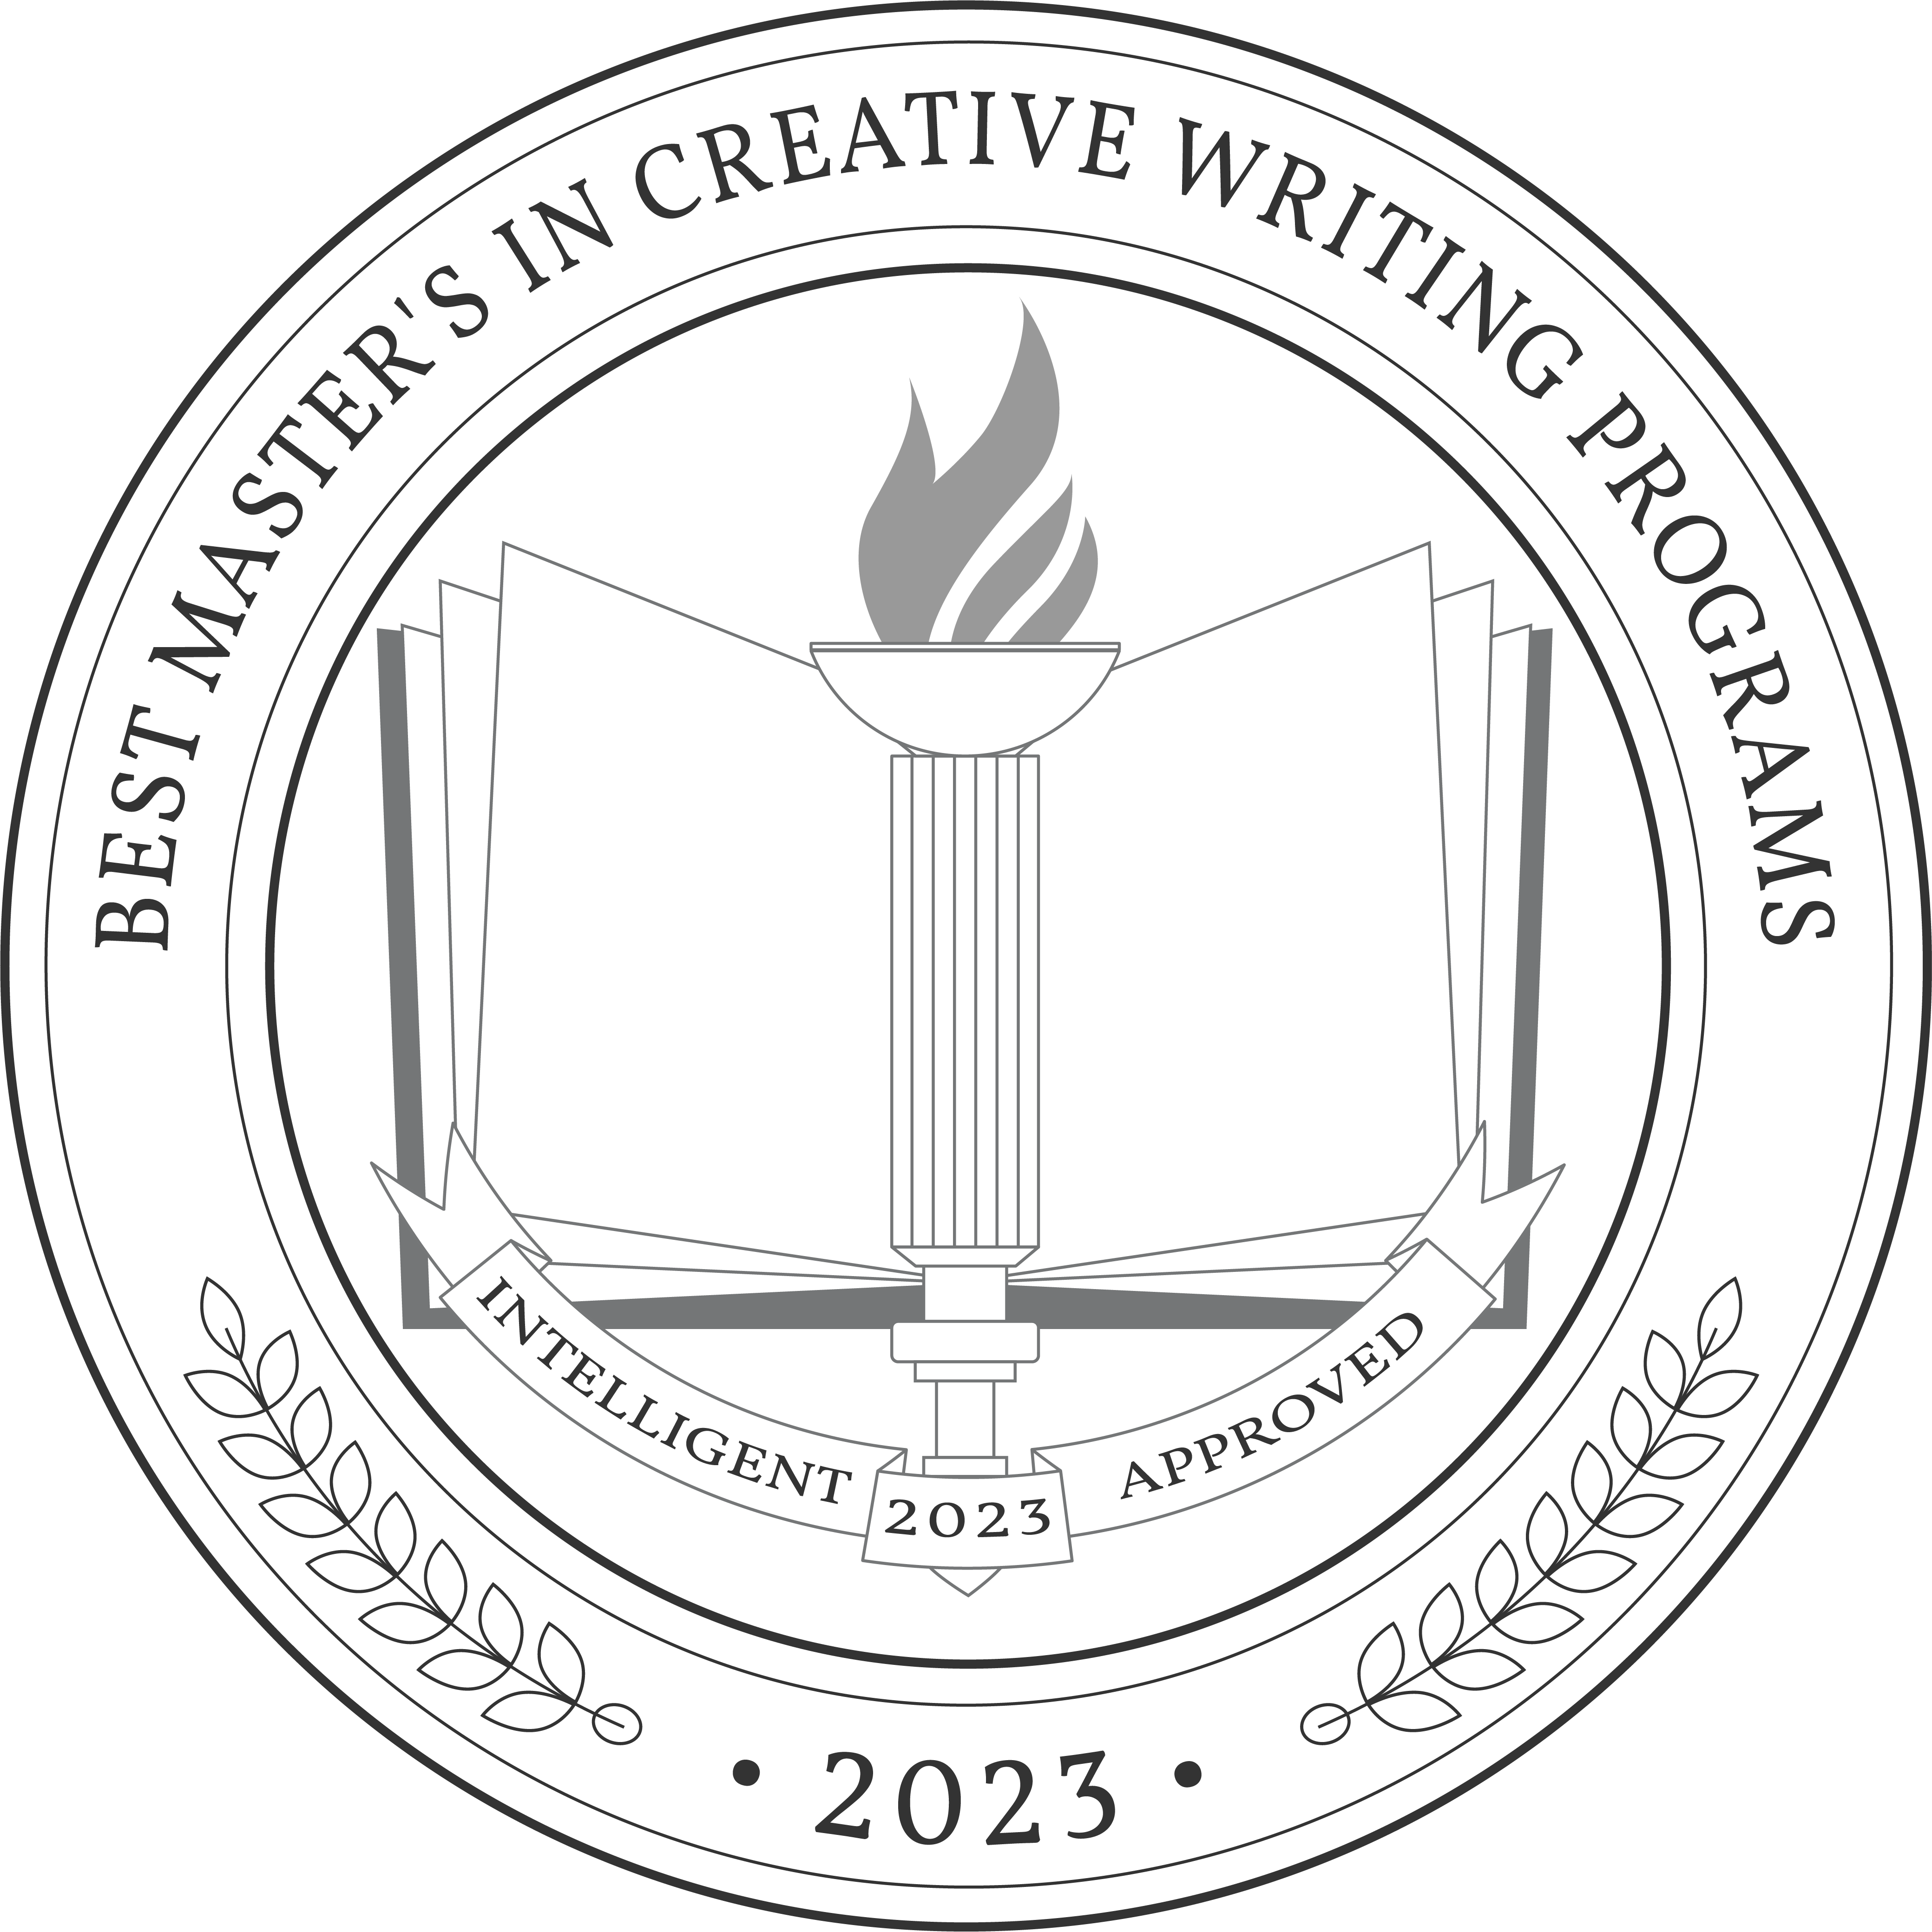 masters in creative writing scholarship